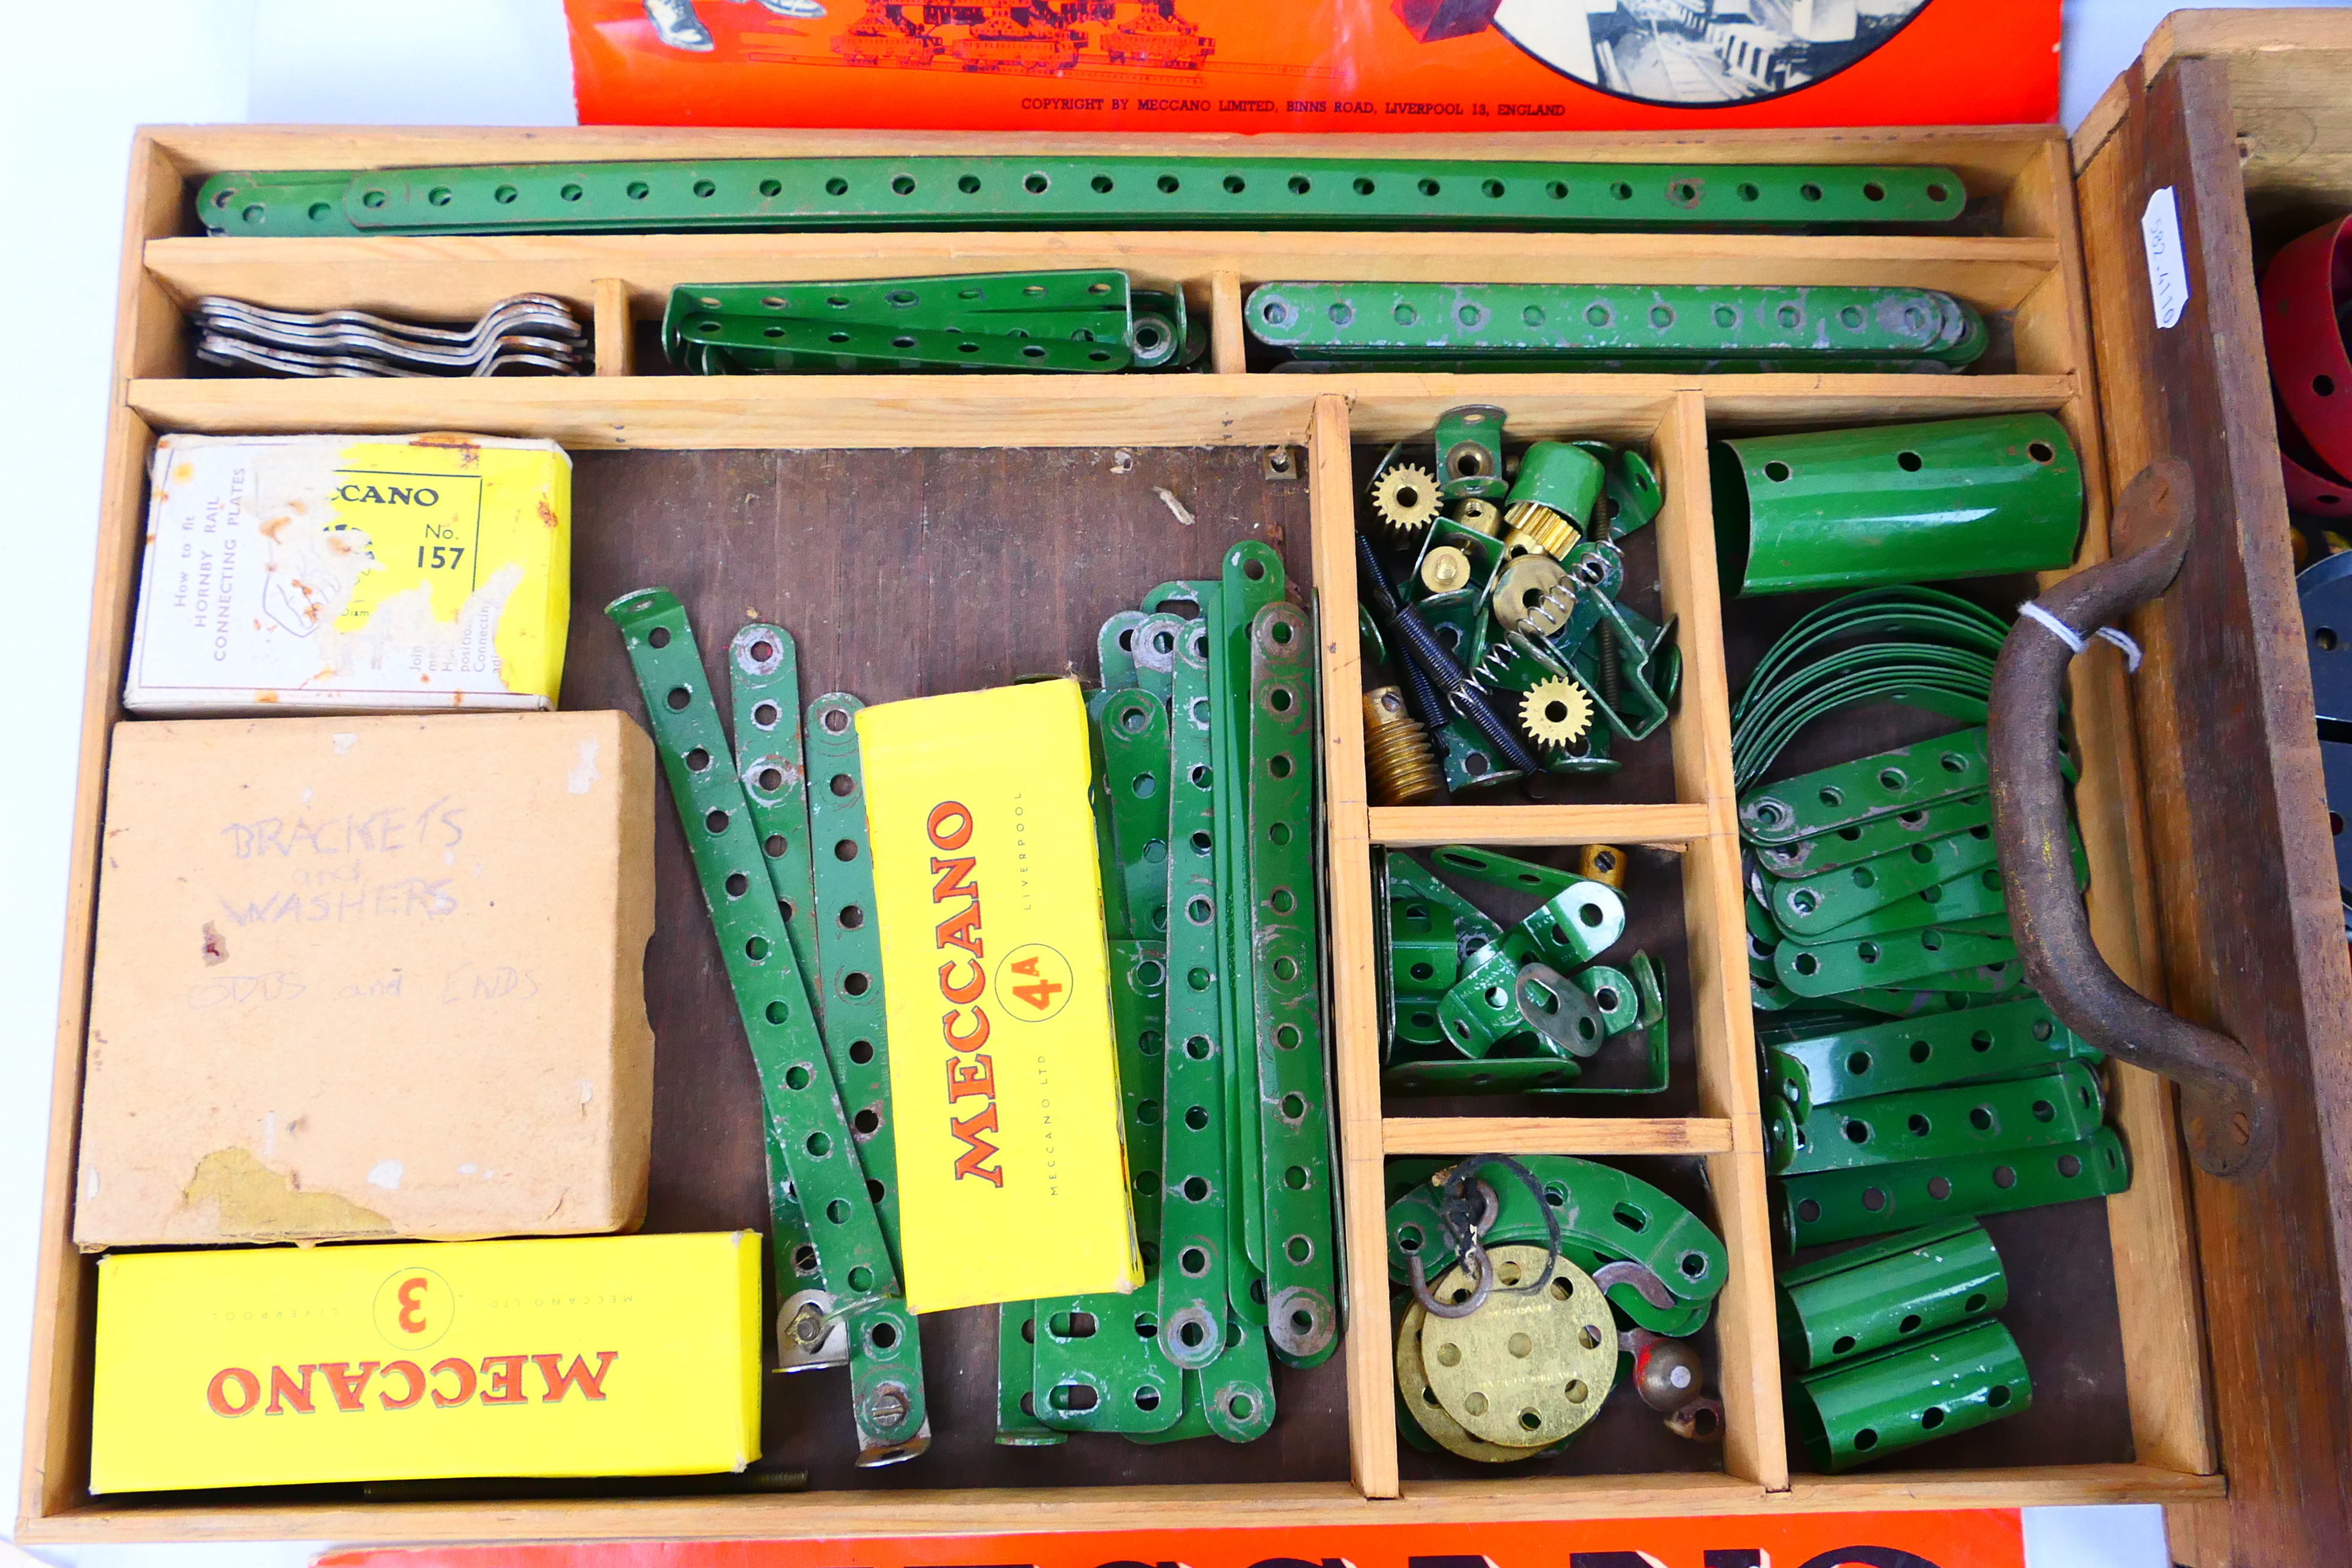 Meccano - A vintage wooden boxed Meccano set containing a quantity of red and green parts, wheels, - Image 2 of 8